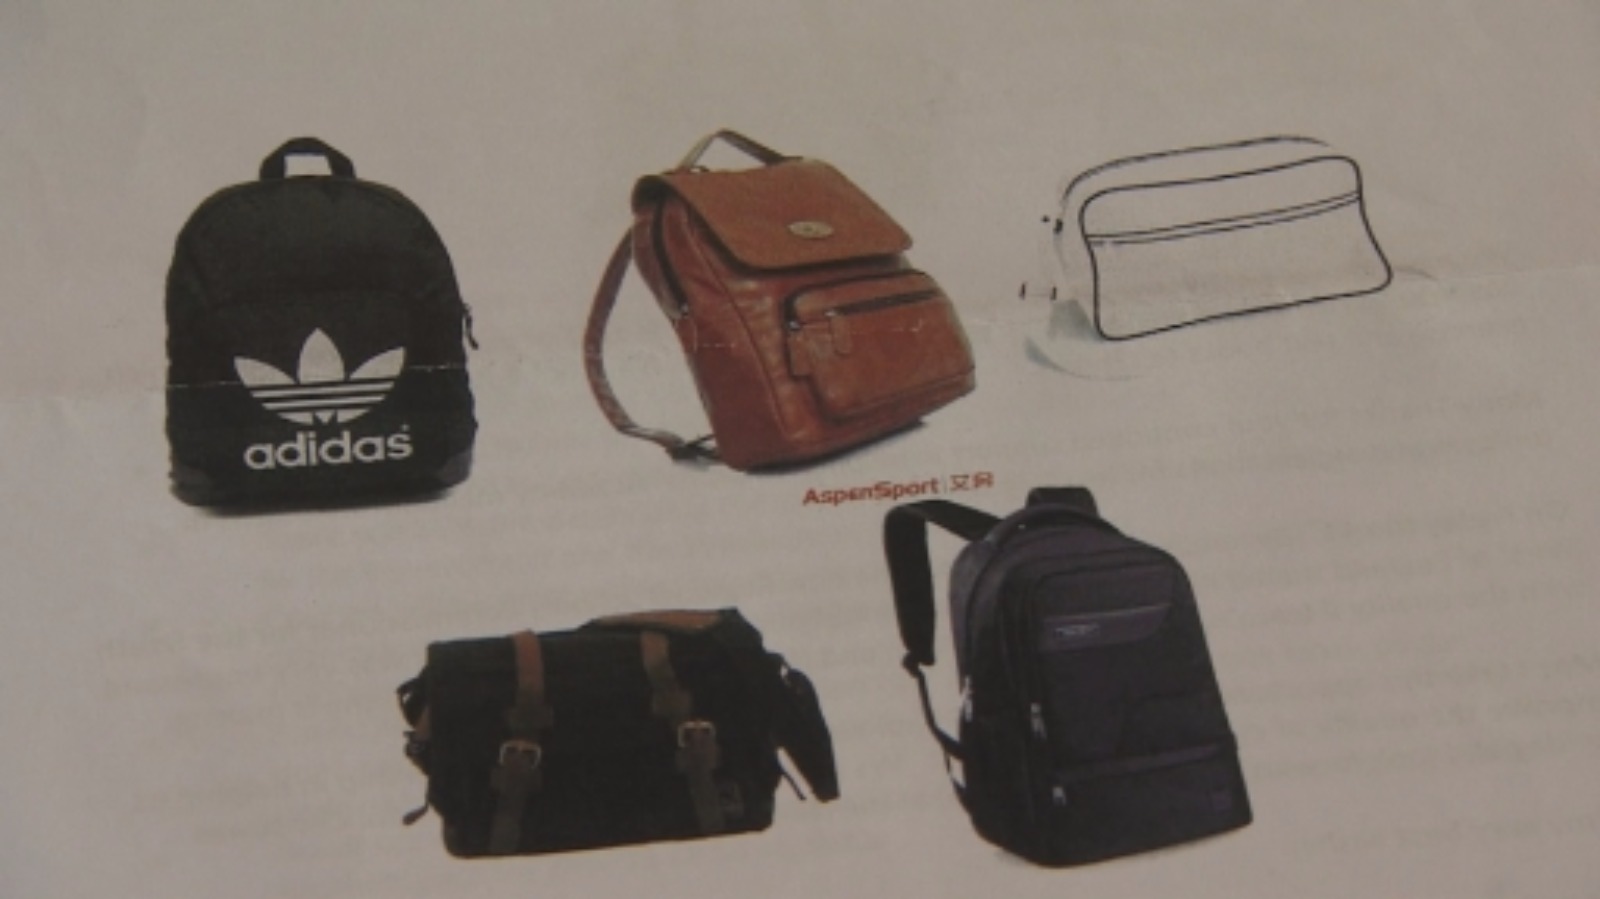 School bans pupils from carrying 'inappropriate' designer handbags